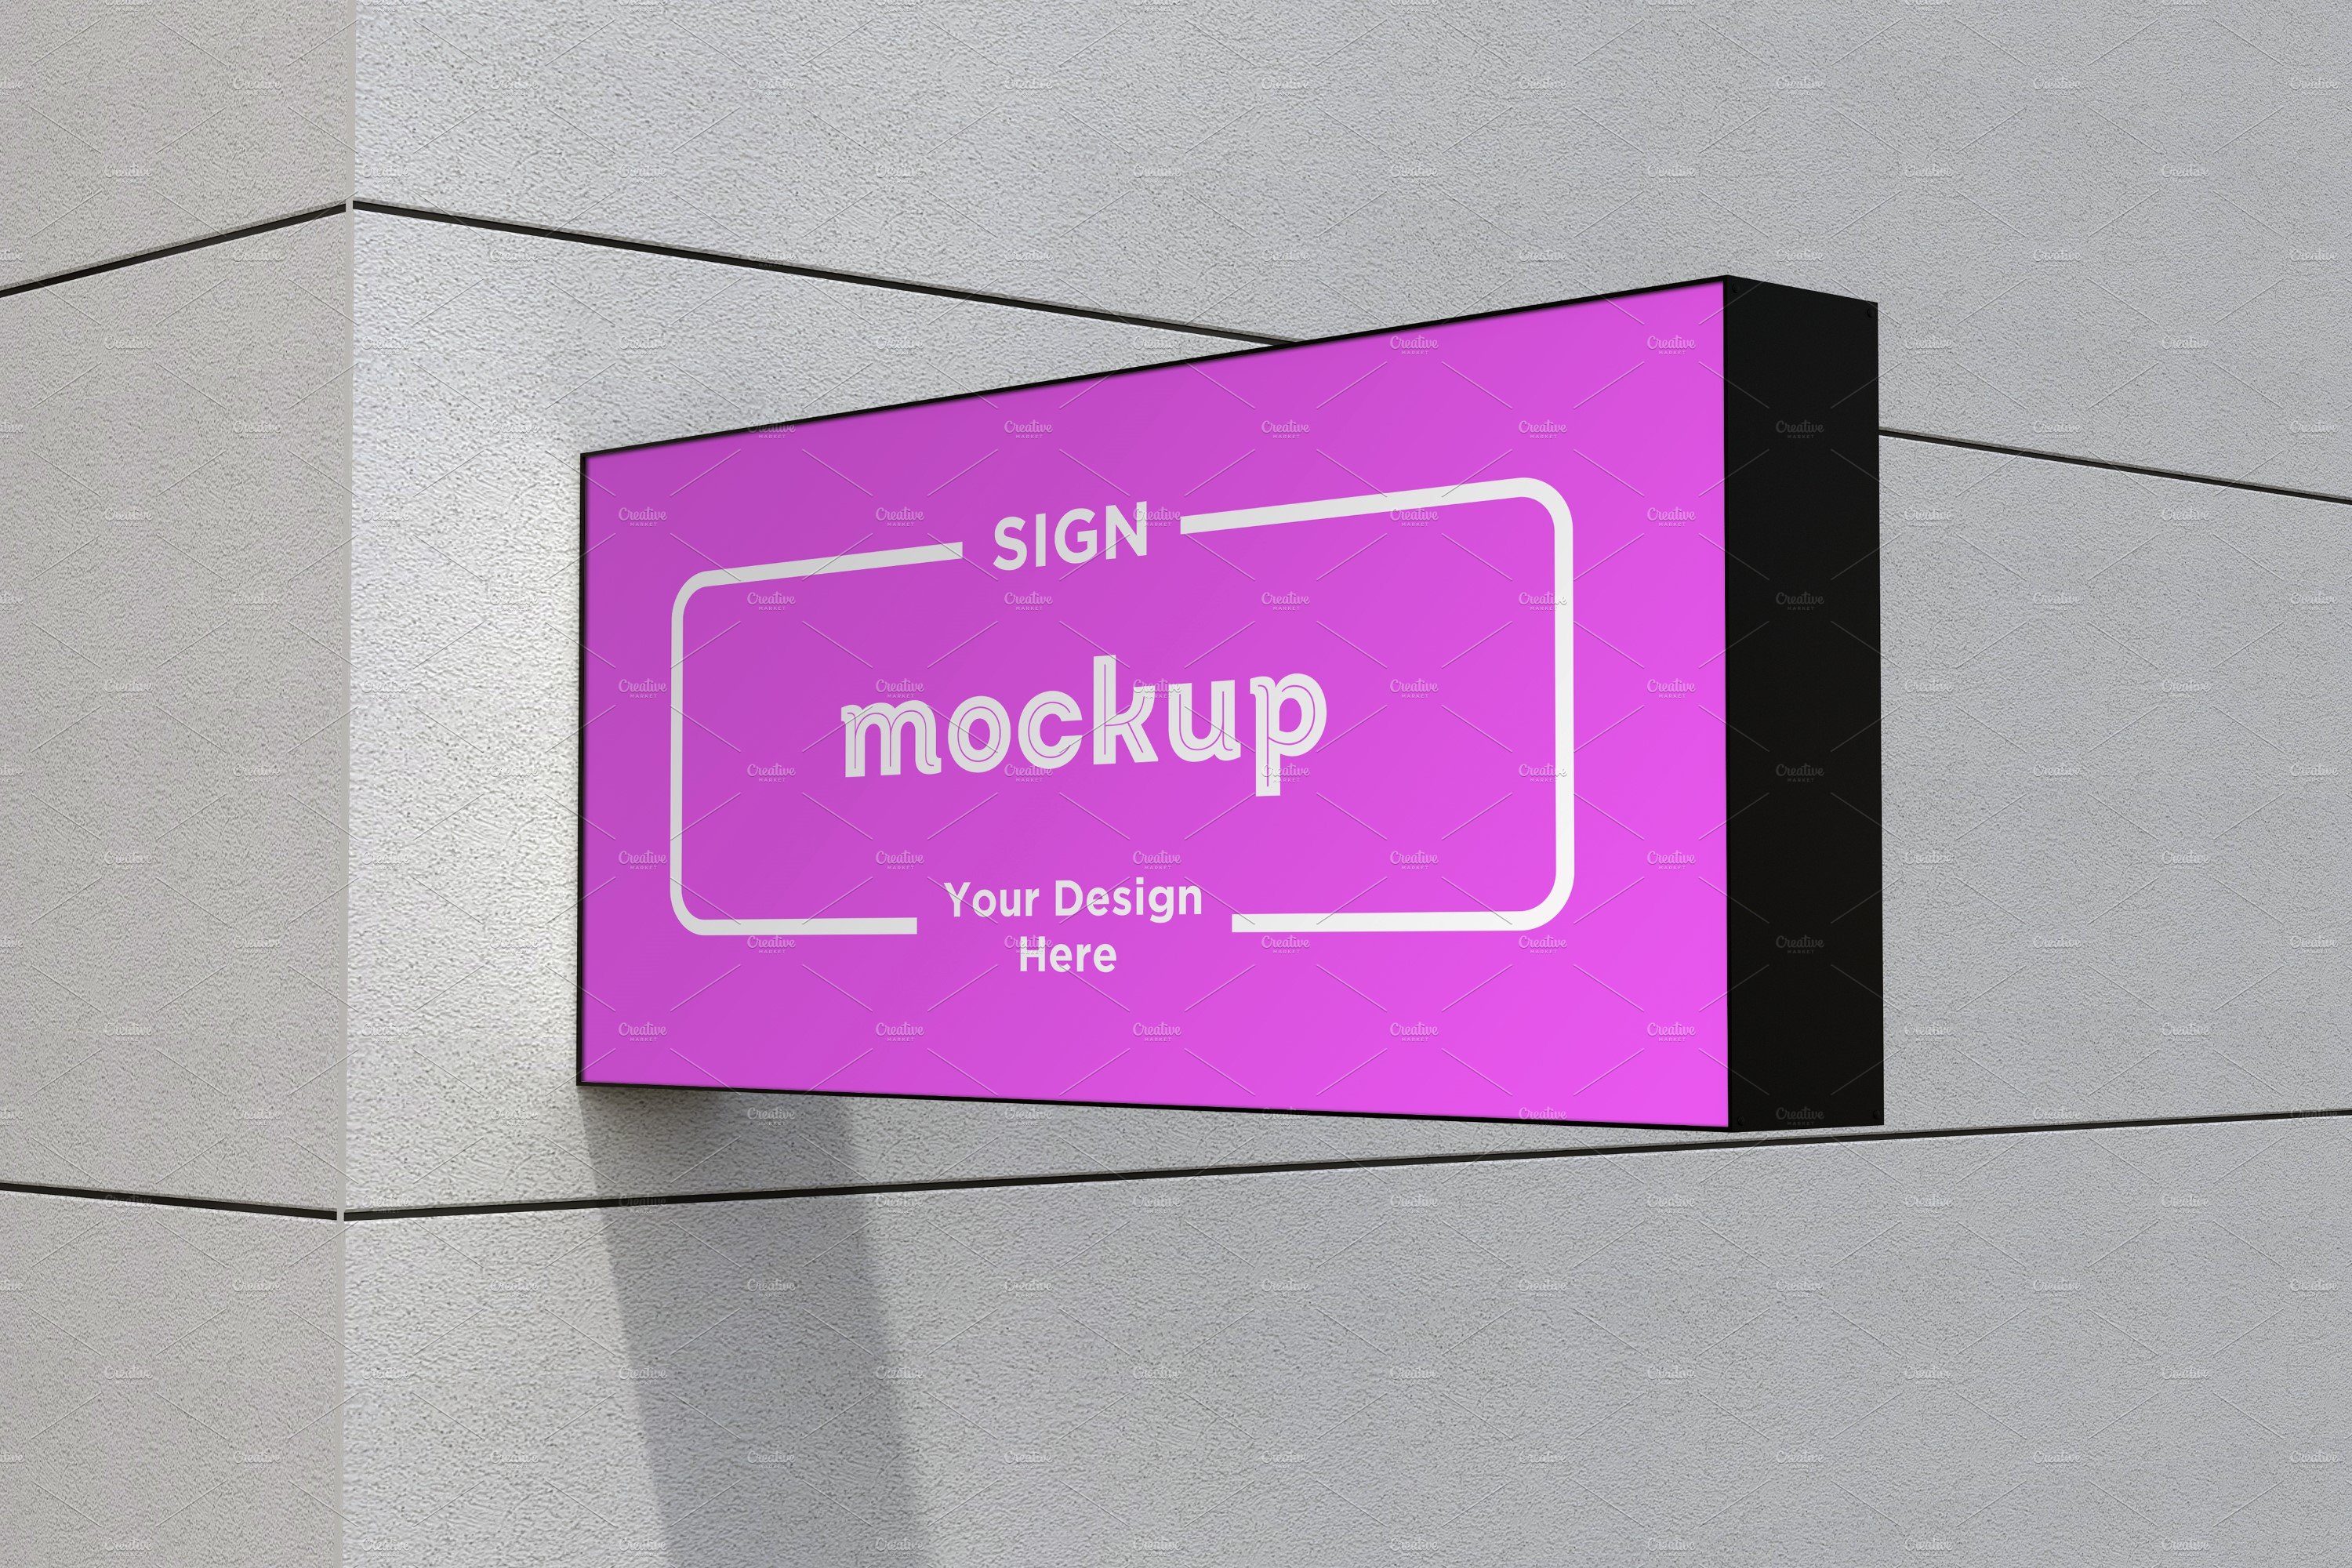 Rectangle Wall Mount Sign Mockup cover image.